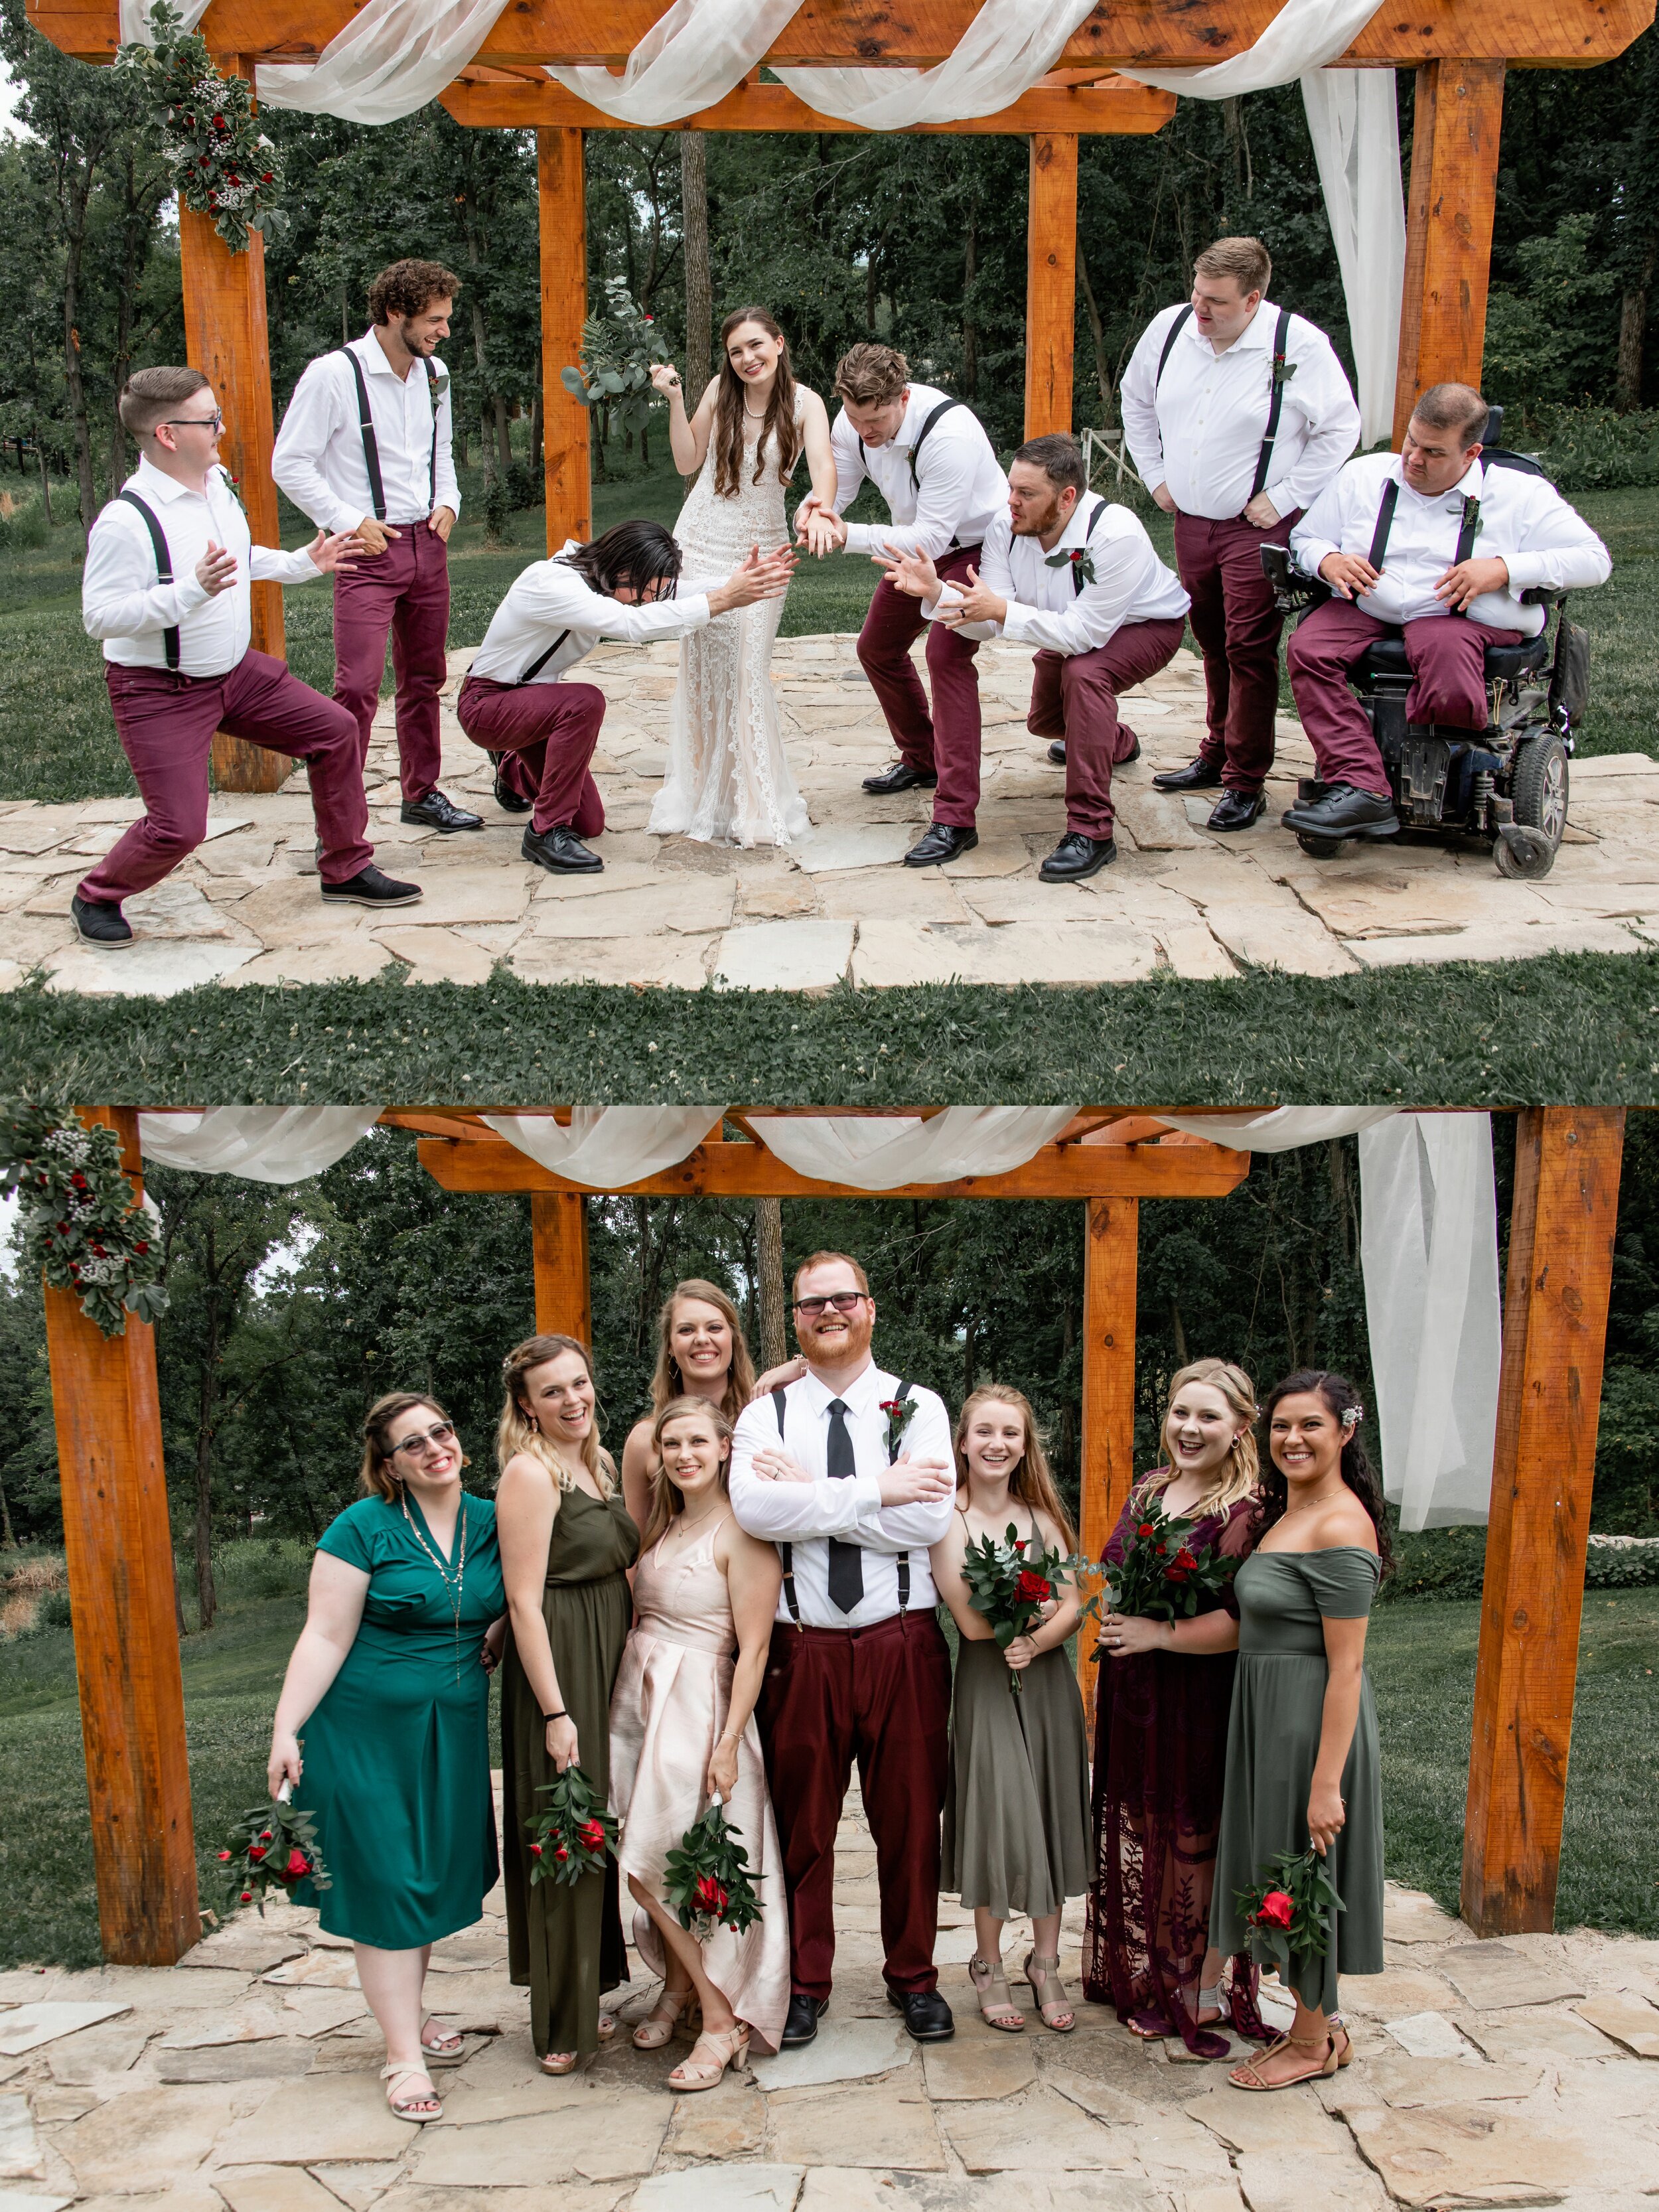 Summer Outdoor Wedding Photography at Stockton Lake by Merry Ohler - 23